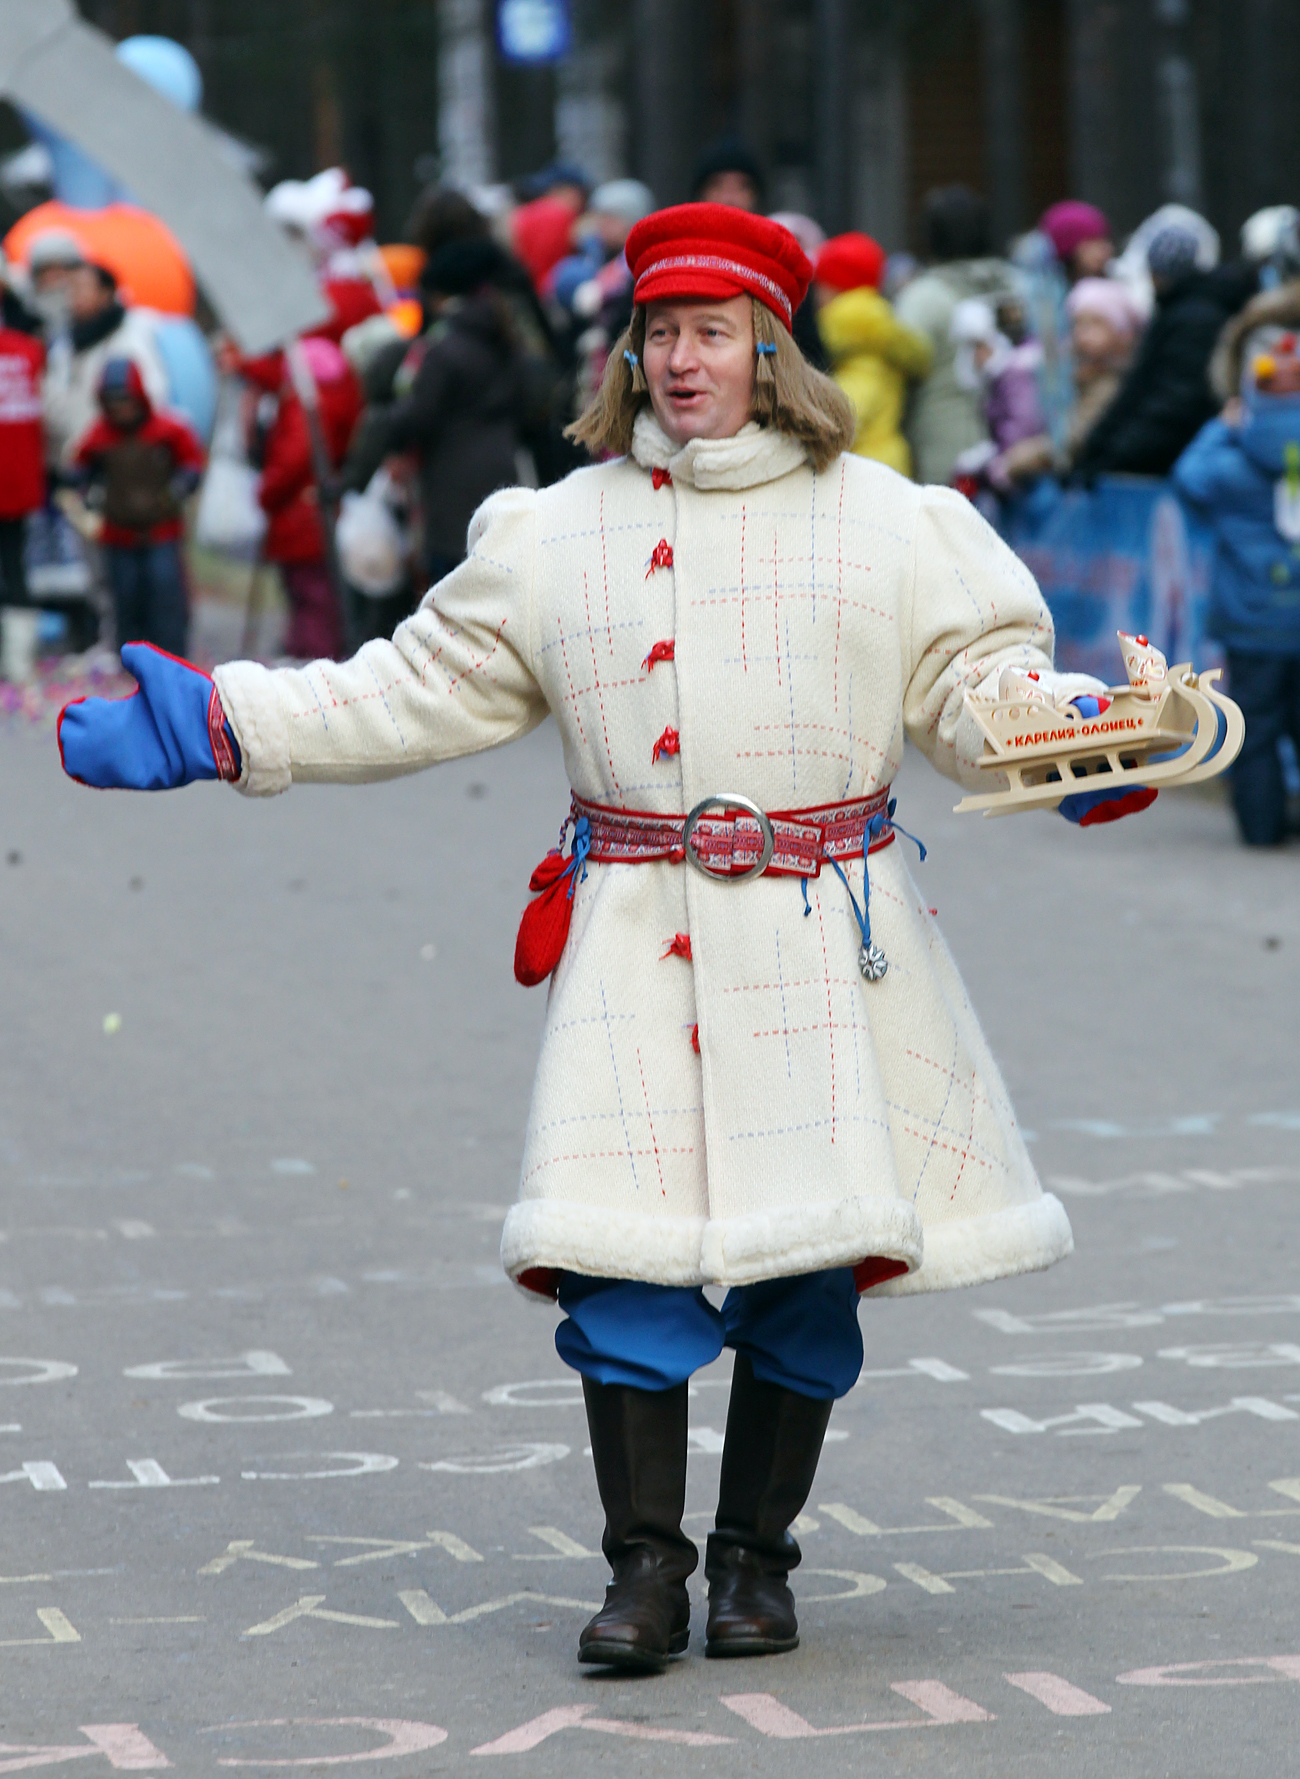 Karelian-language courses have opened in the region, while Karelia's Santa Claus – the young and beardless Pakkaine – has become a popular local figure. Photo: Pakkaine-frost from Karelia parades during Father Frost's birthday celebrations in Veliky Ustyug. Source: Mikhail Fomichev/RIA Novosti